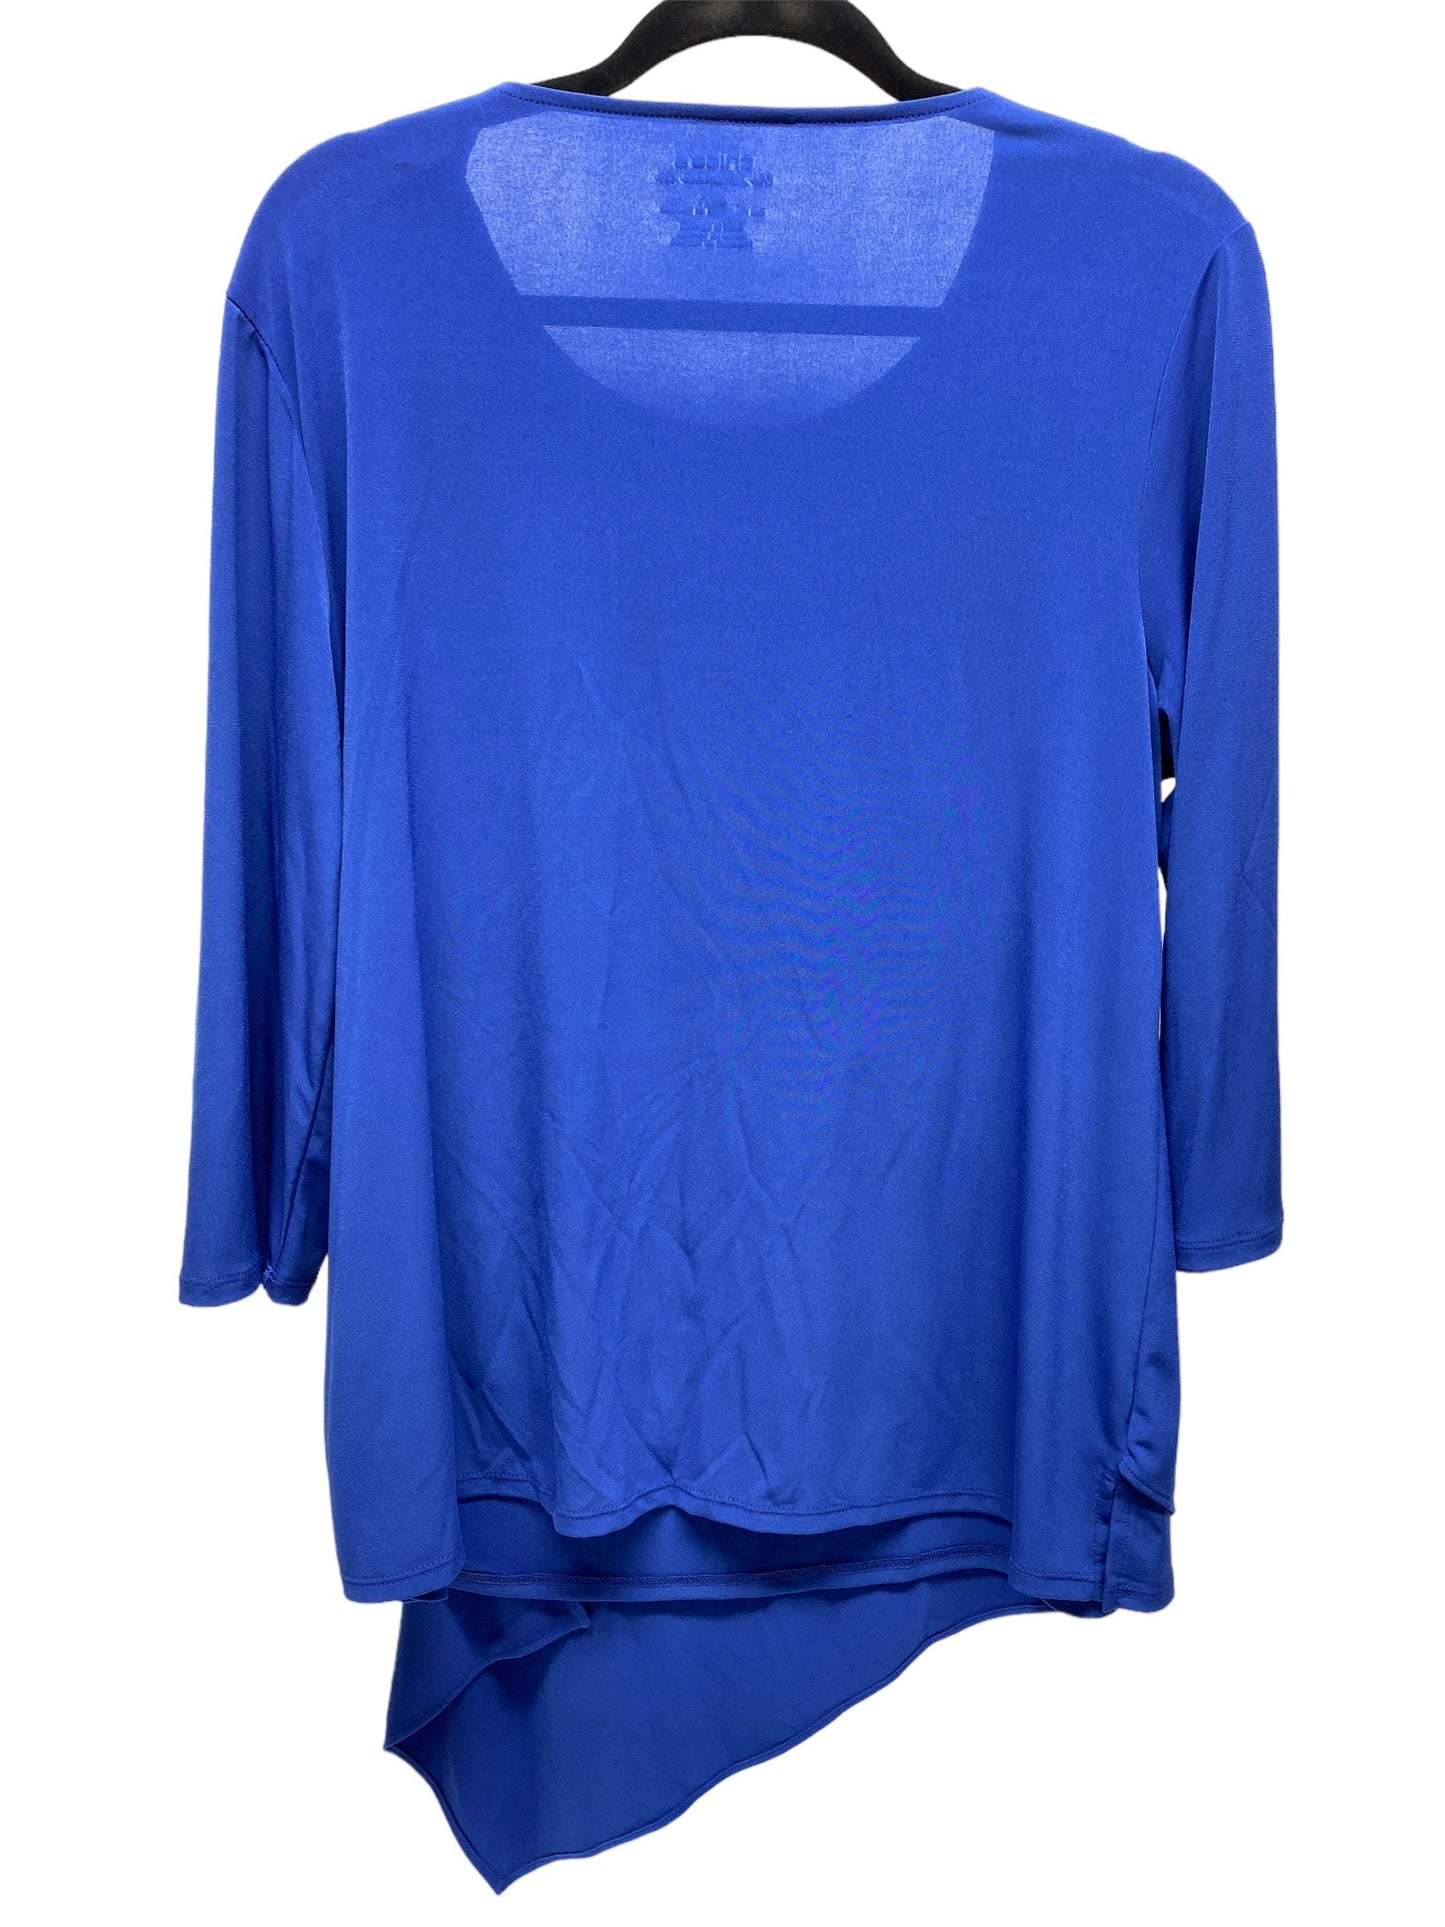 Blue Tunic 3/4 Sleeve Chicos, Size L